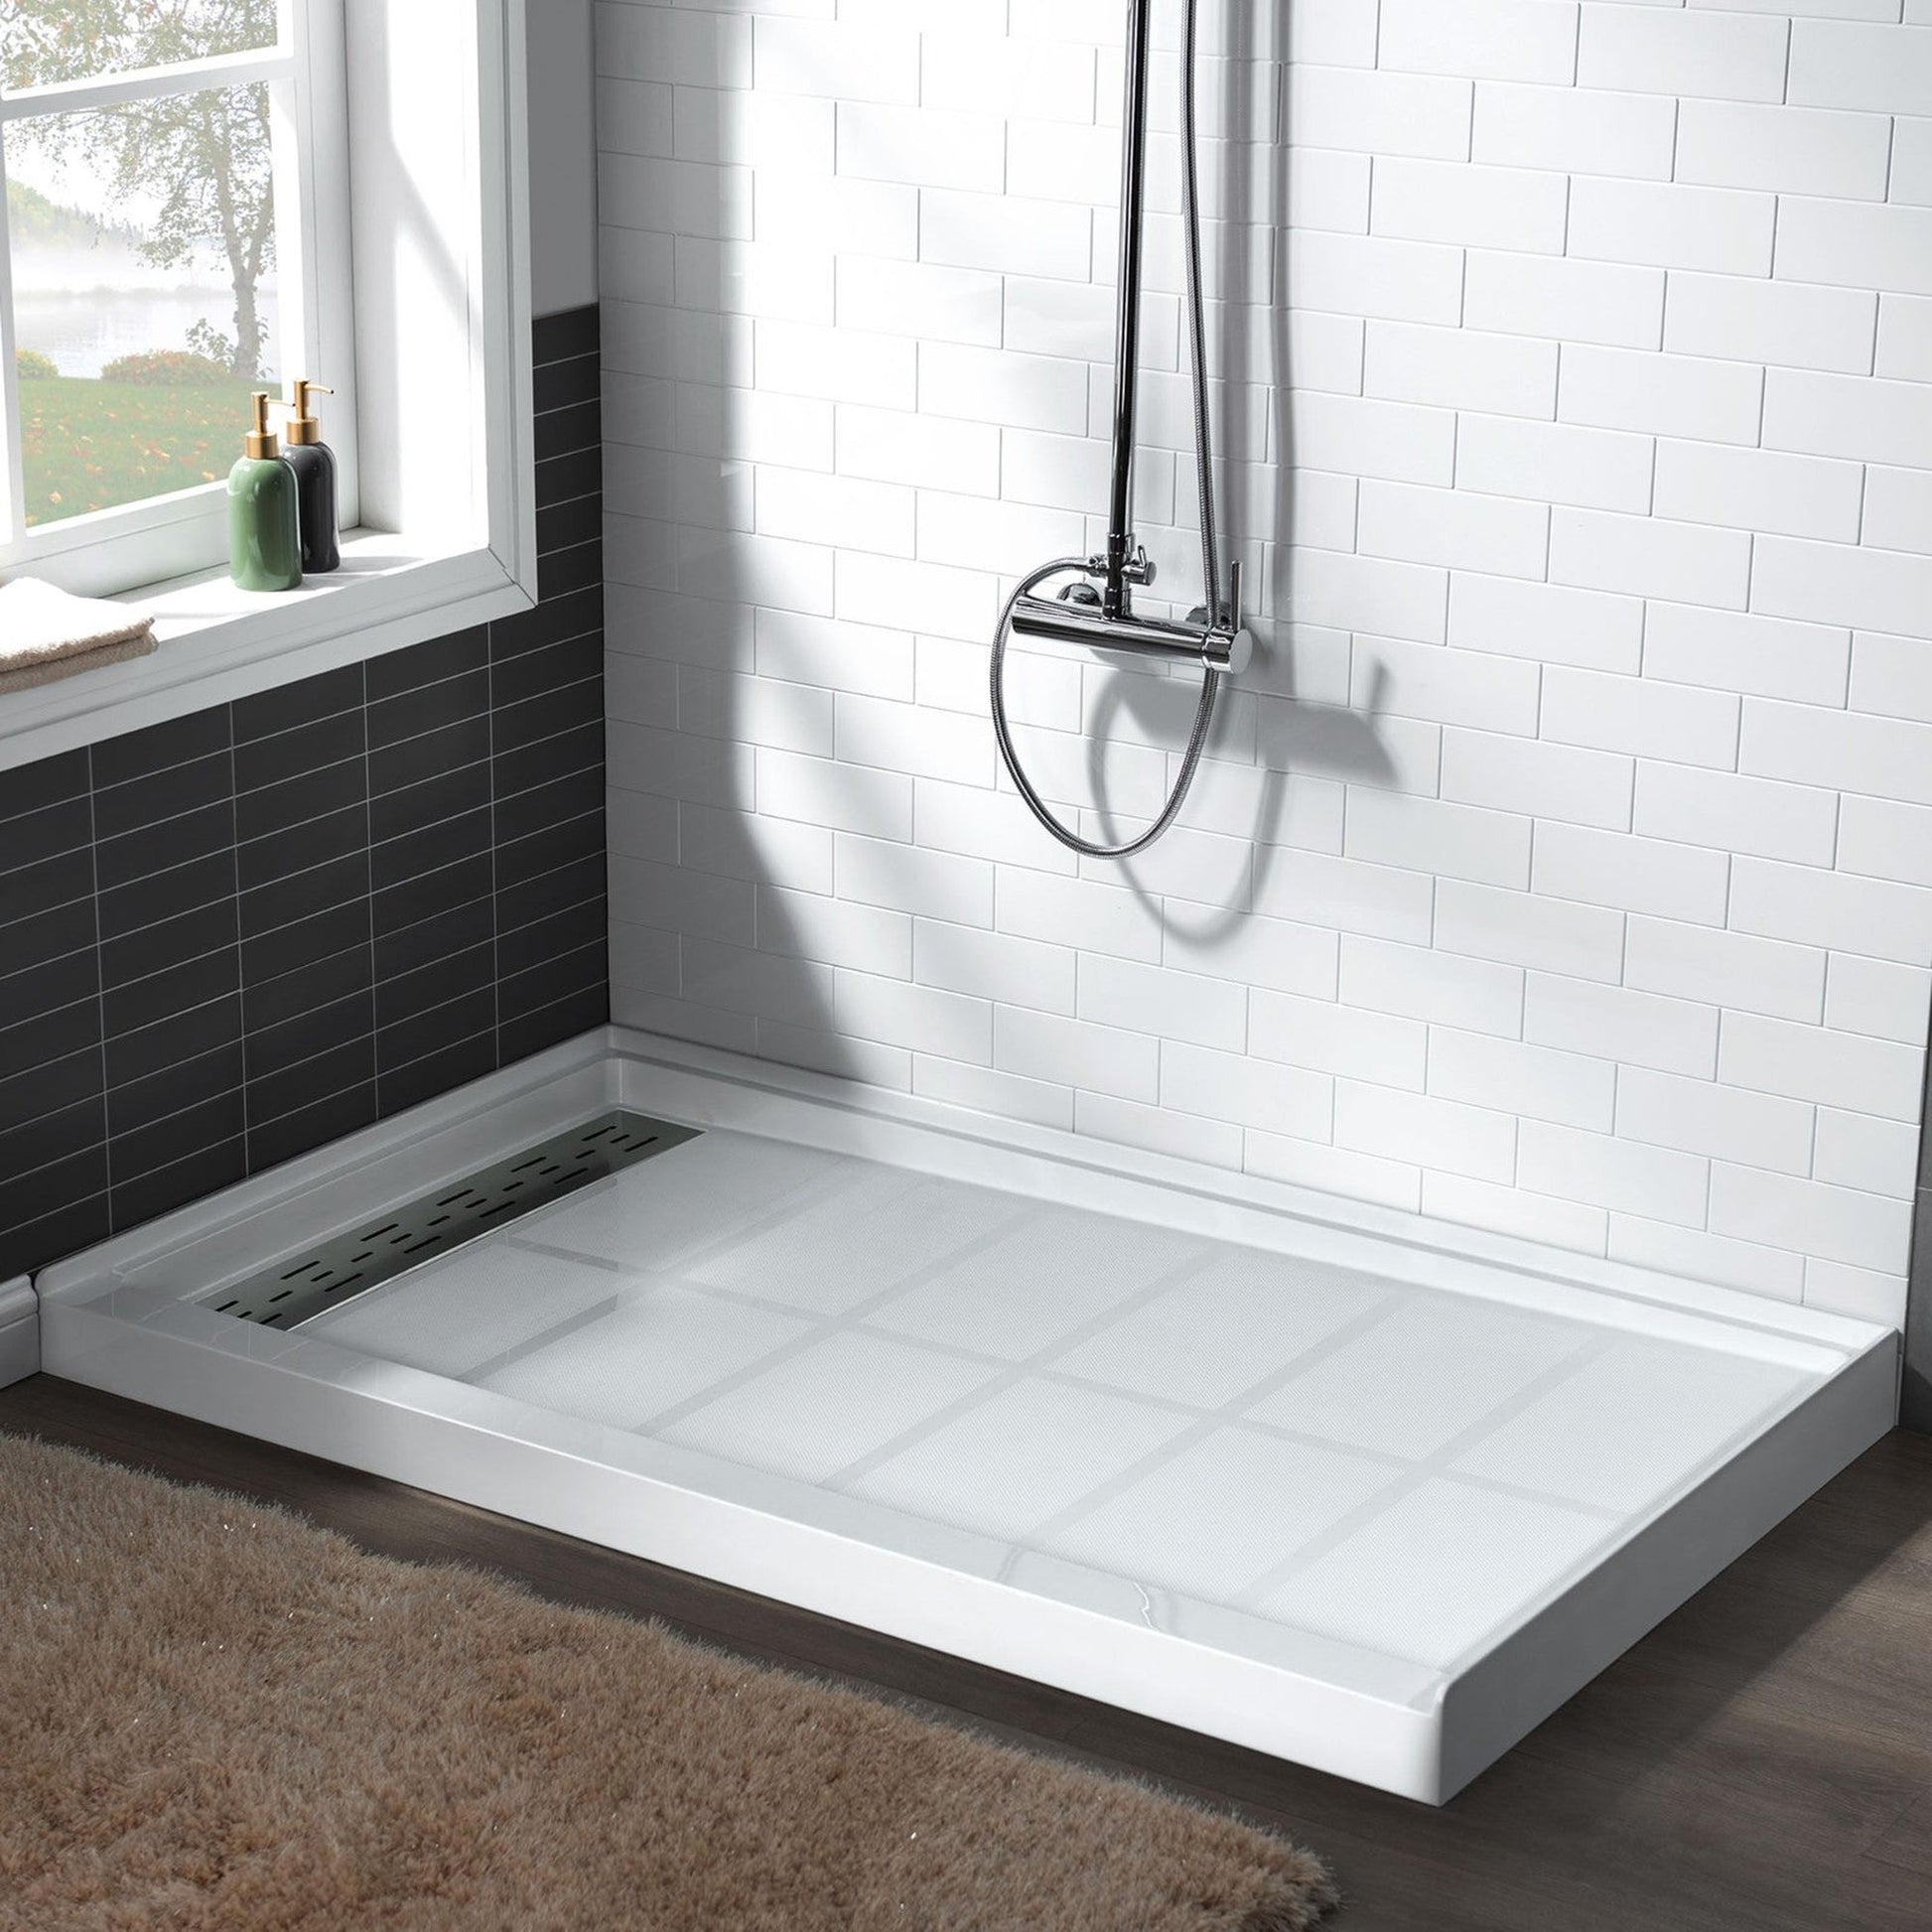 WoodBridge 60" x 32" White Solid Surface Shower Base Left Drain Location With Brushed Nickel Trench Drain Cover